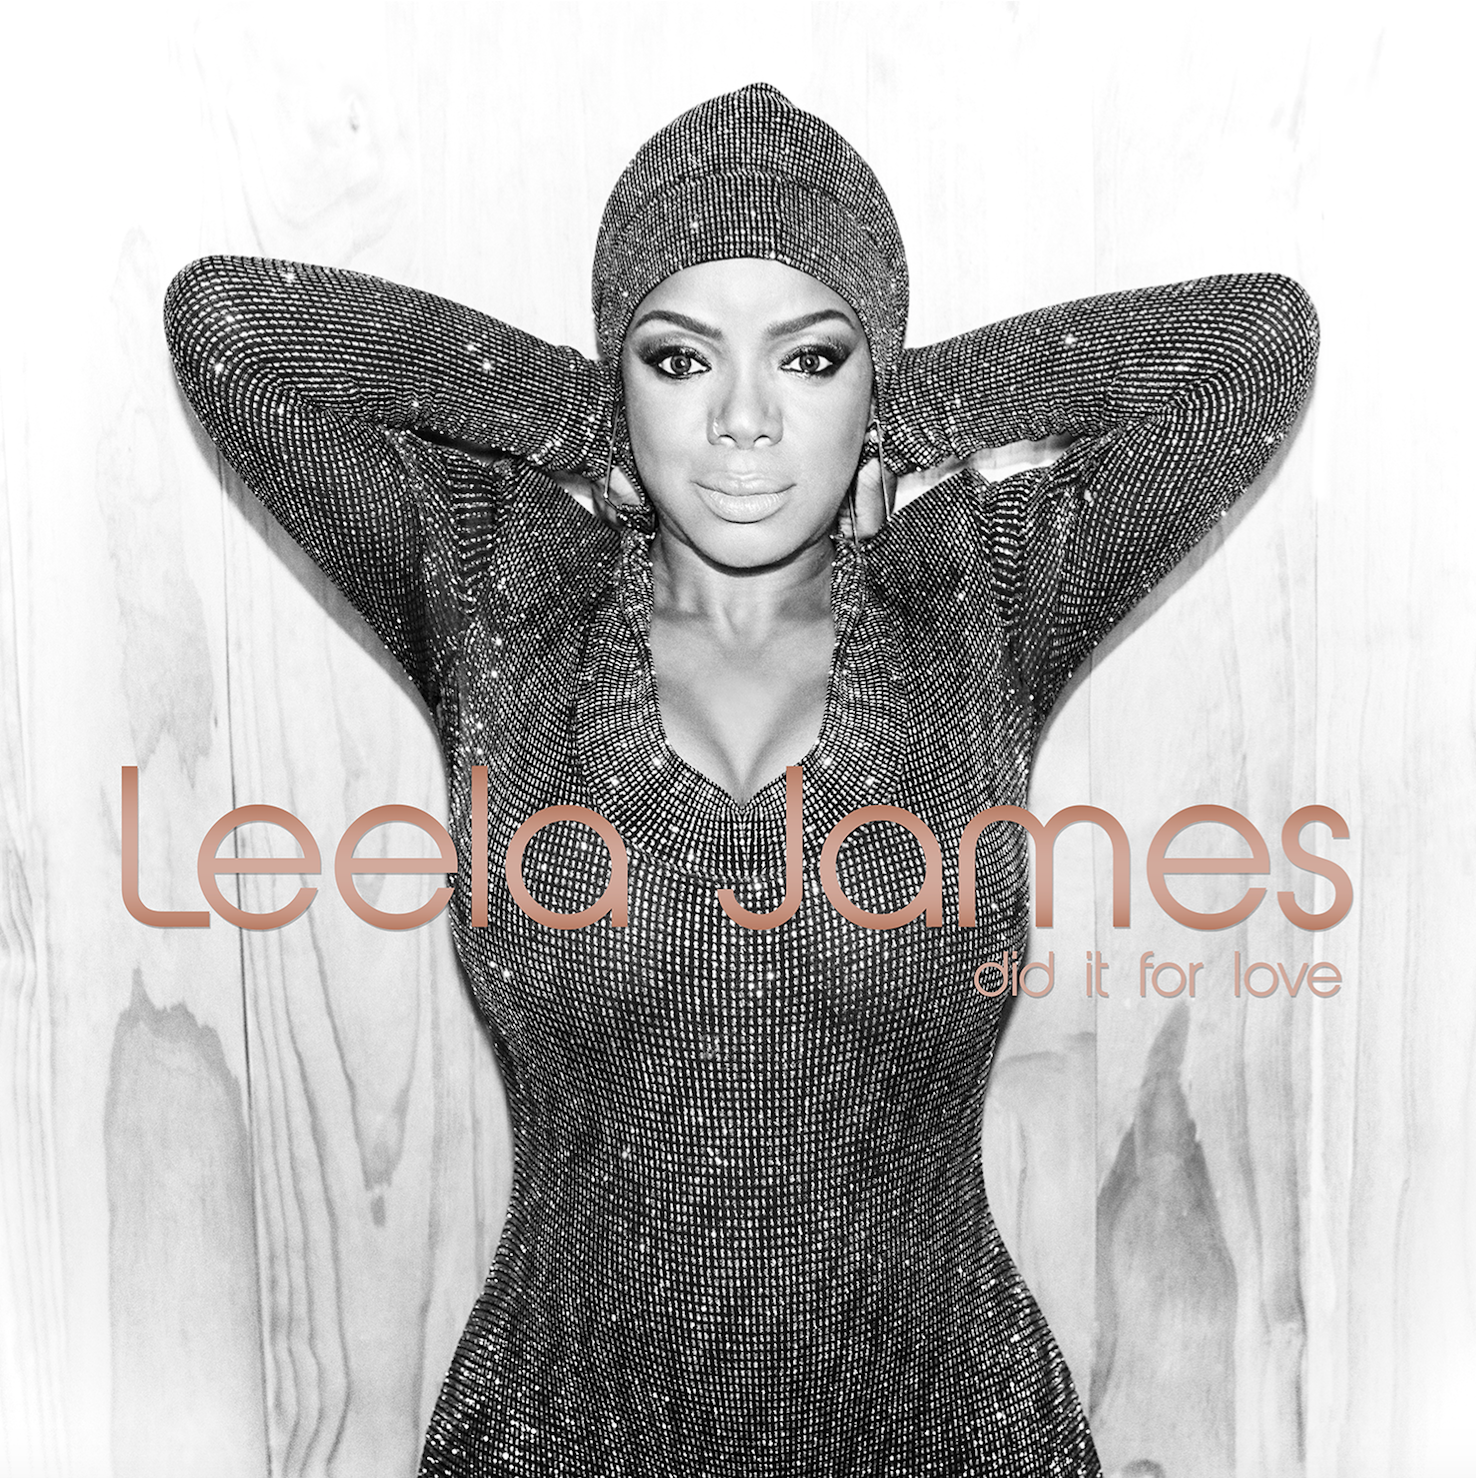 EXCLUSIVE PREMIERE: Leela James Releases New Single 'Hard For Me' From Forthcoming Album 'Did It For Love'
